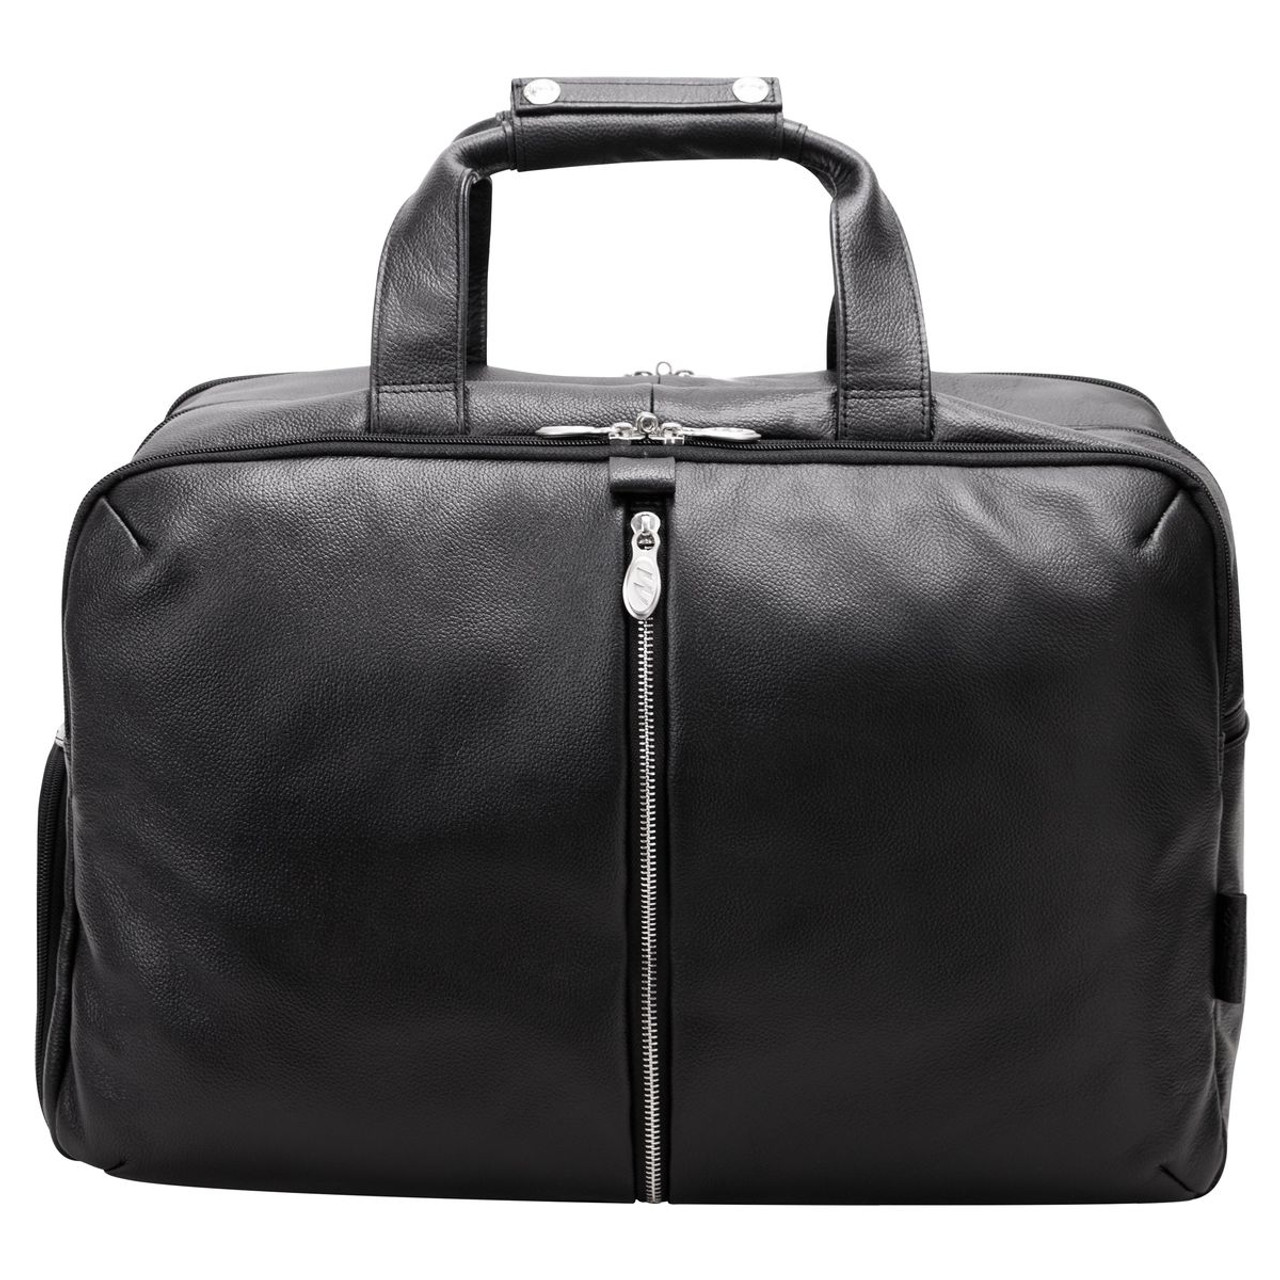 AVONDALE Leather Carry-All 17-inch Laptop Duffel Bag product image